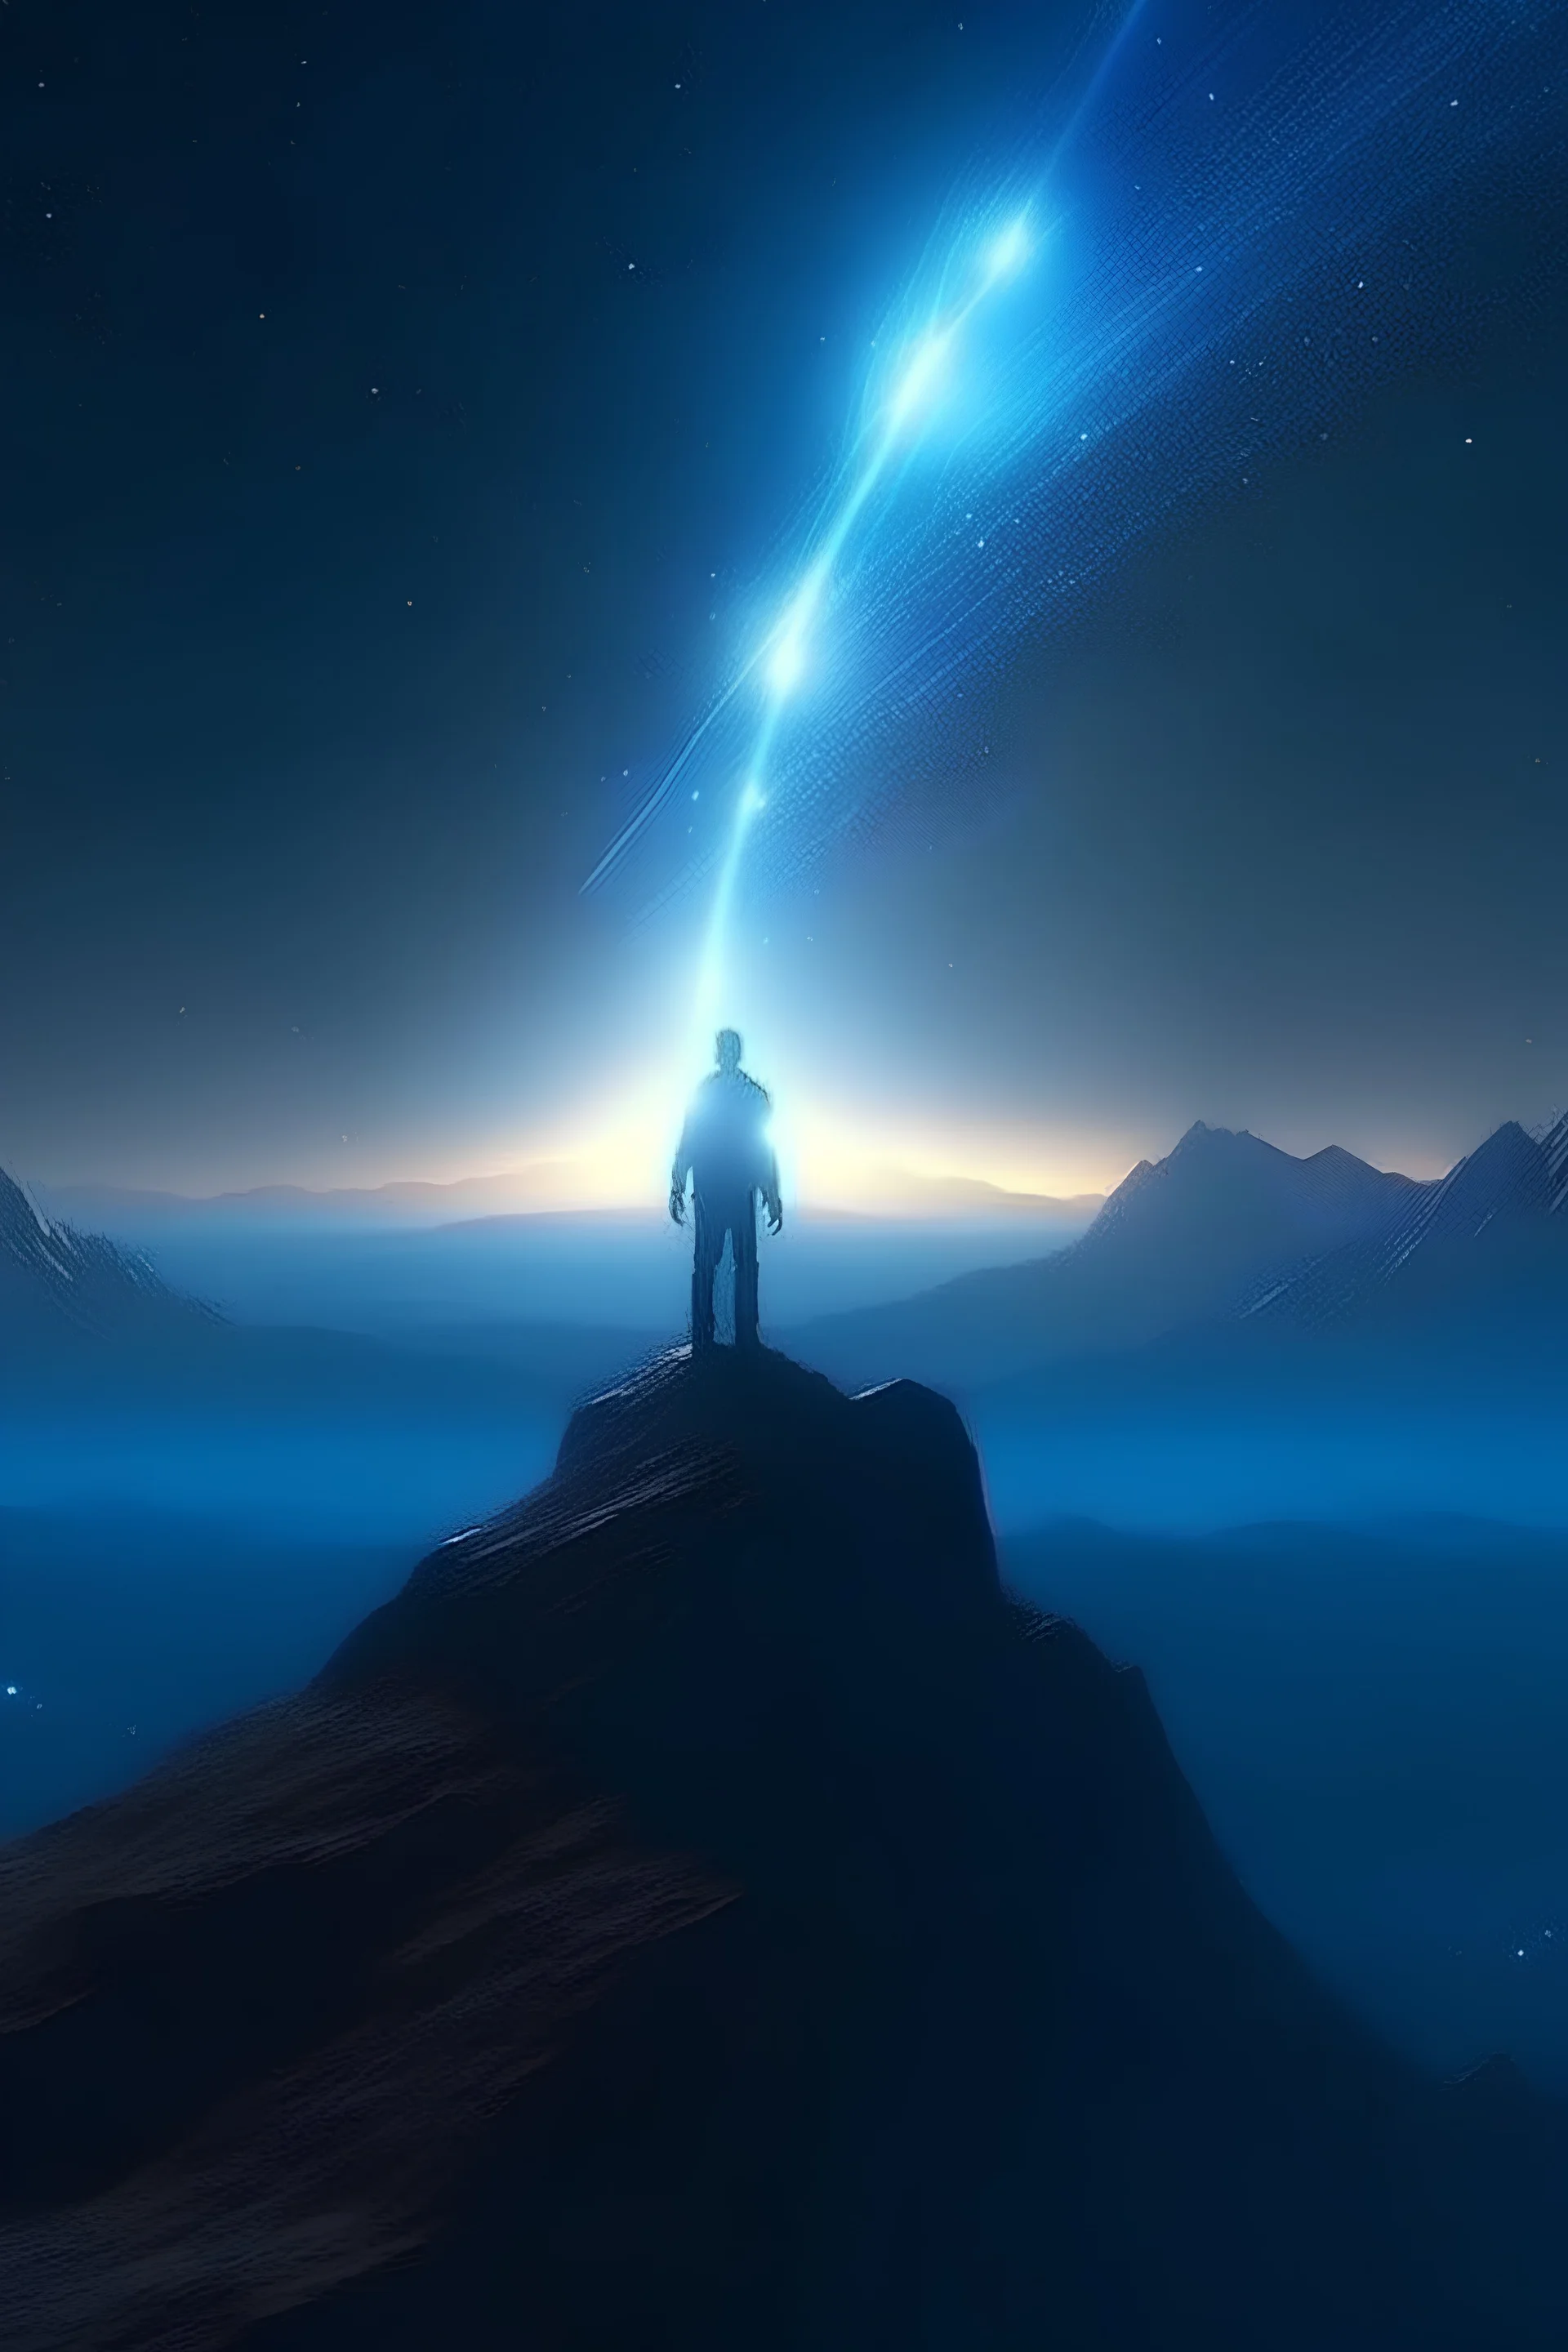 Generate a scene of A solitary figure standing atop a mountain, channeling energy from the cosmos, with a radiant aura of power emanating around them. 4k, low details